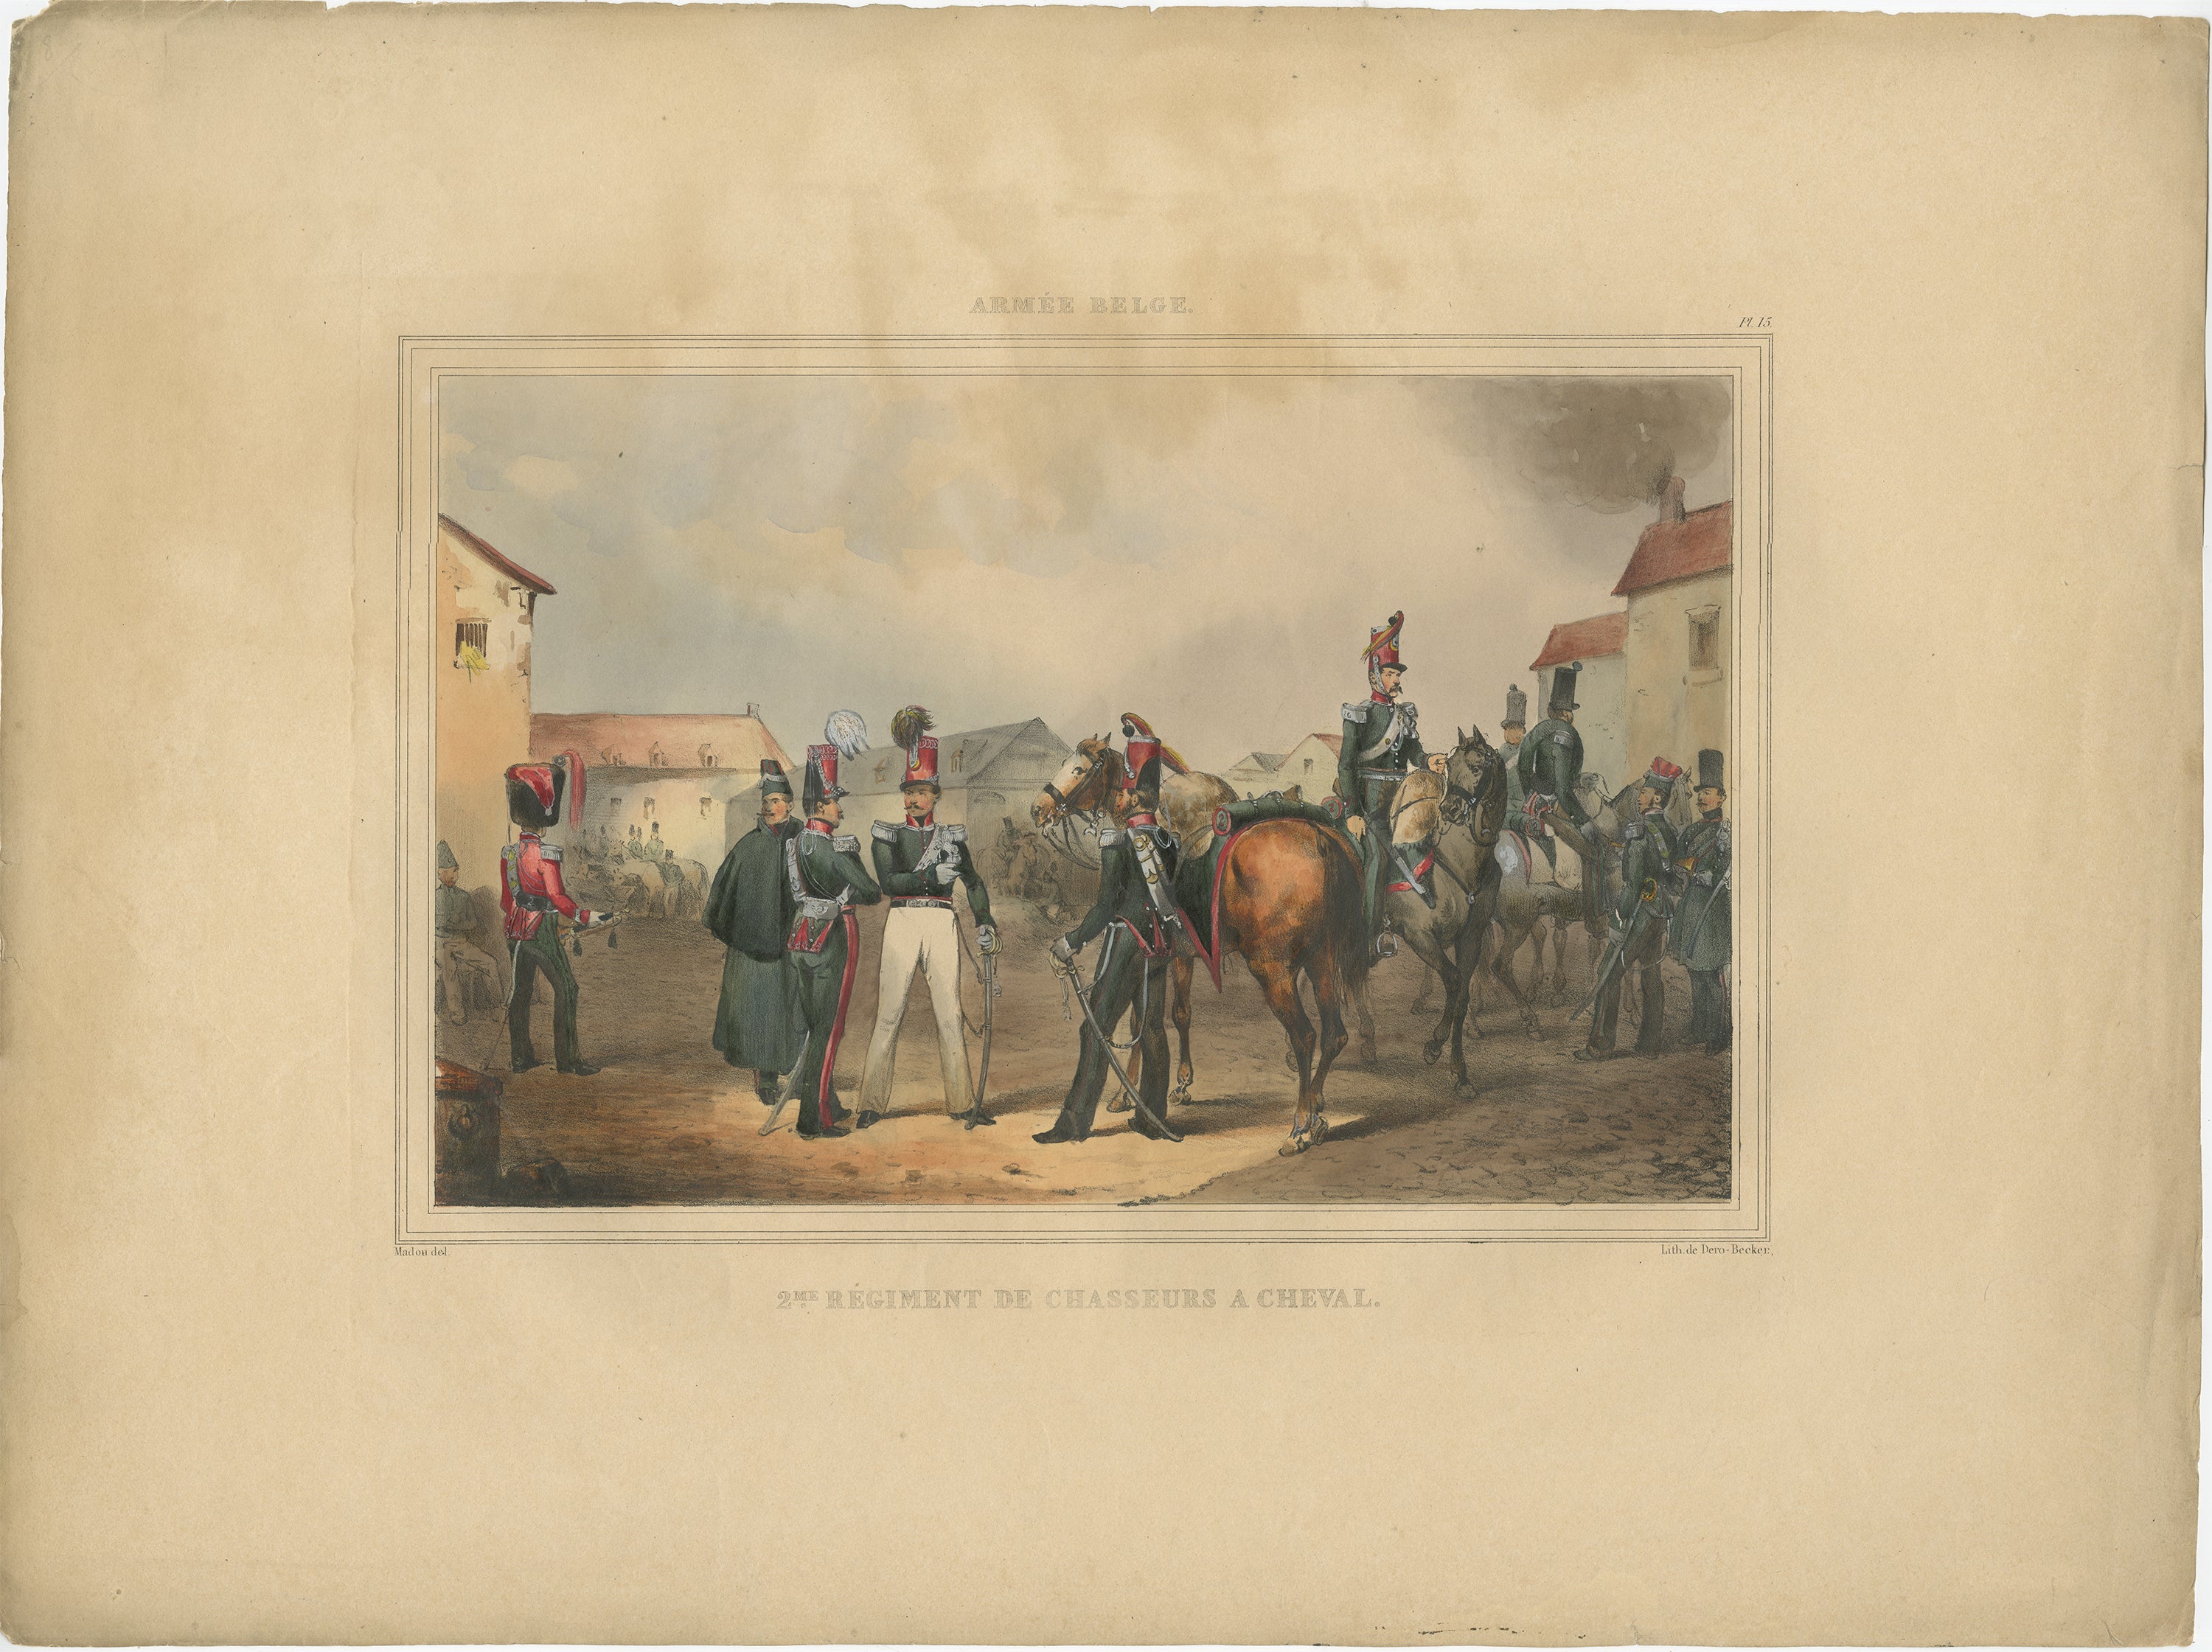 One nicely hand colored print of an original serie of 23 plates, showing soldiers discussing matters in a village. published in 1833. Rare.

From a serie of beautiful lithographed plates with Belgian military costumes after Madou and printed by